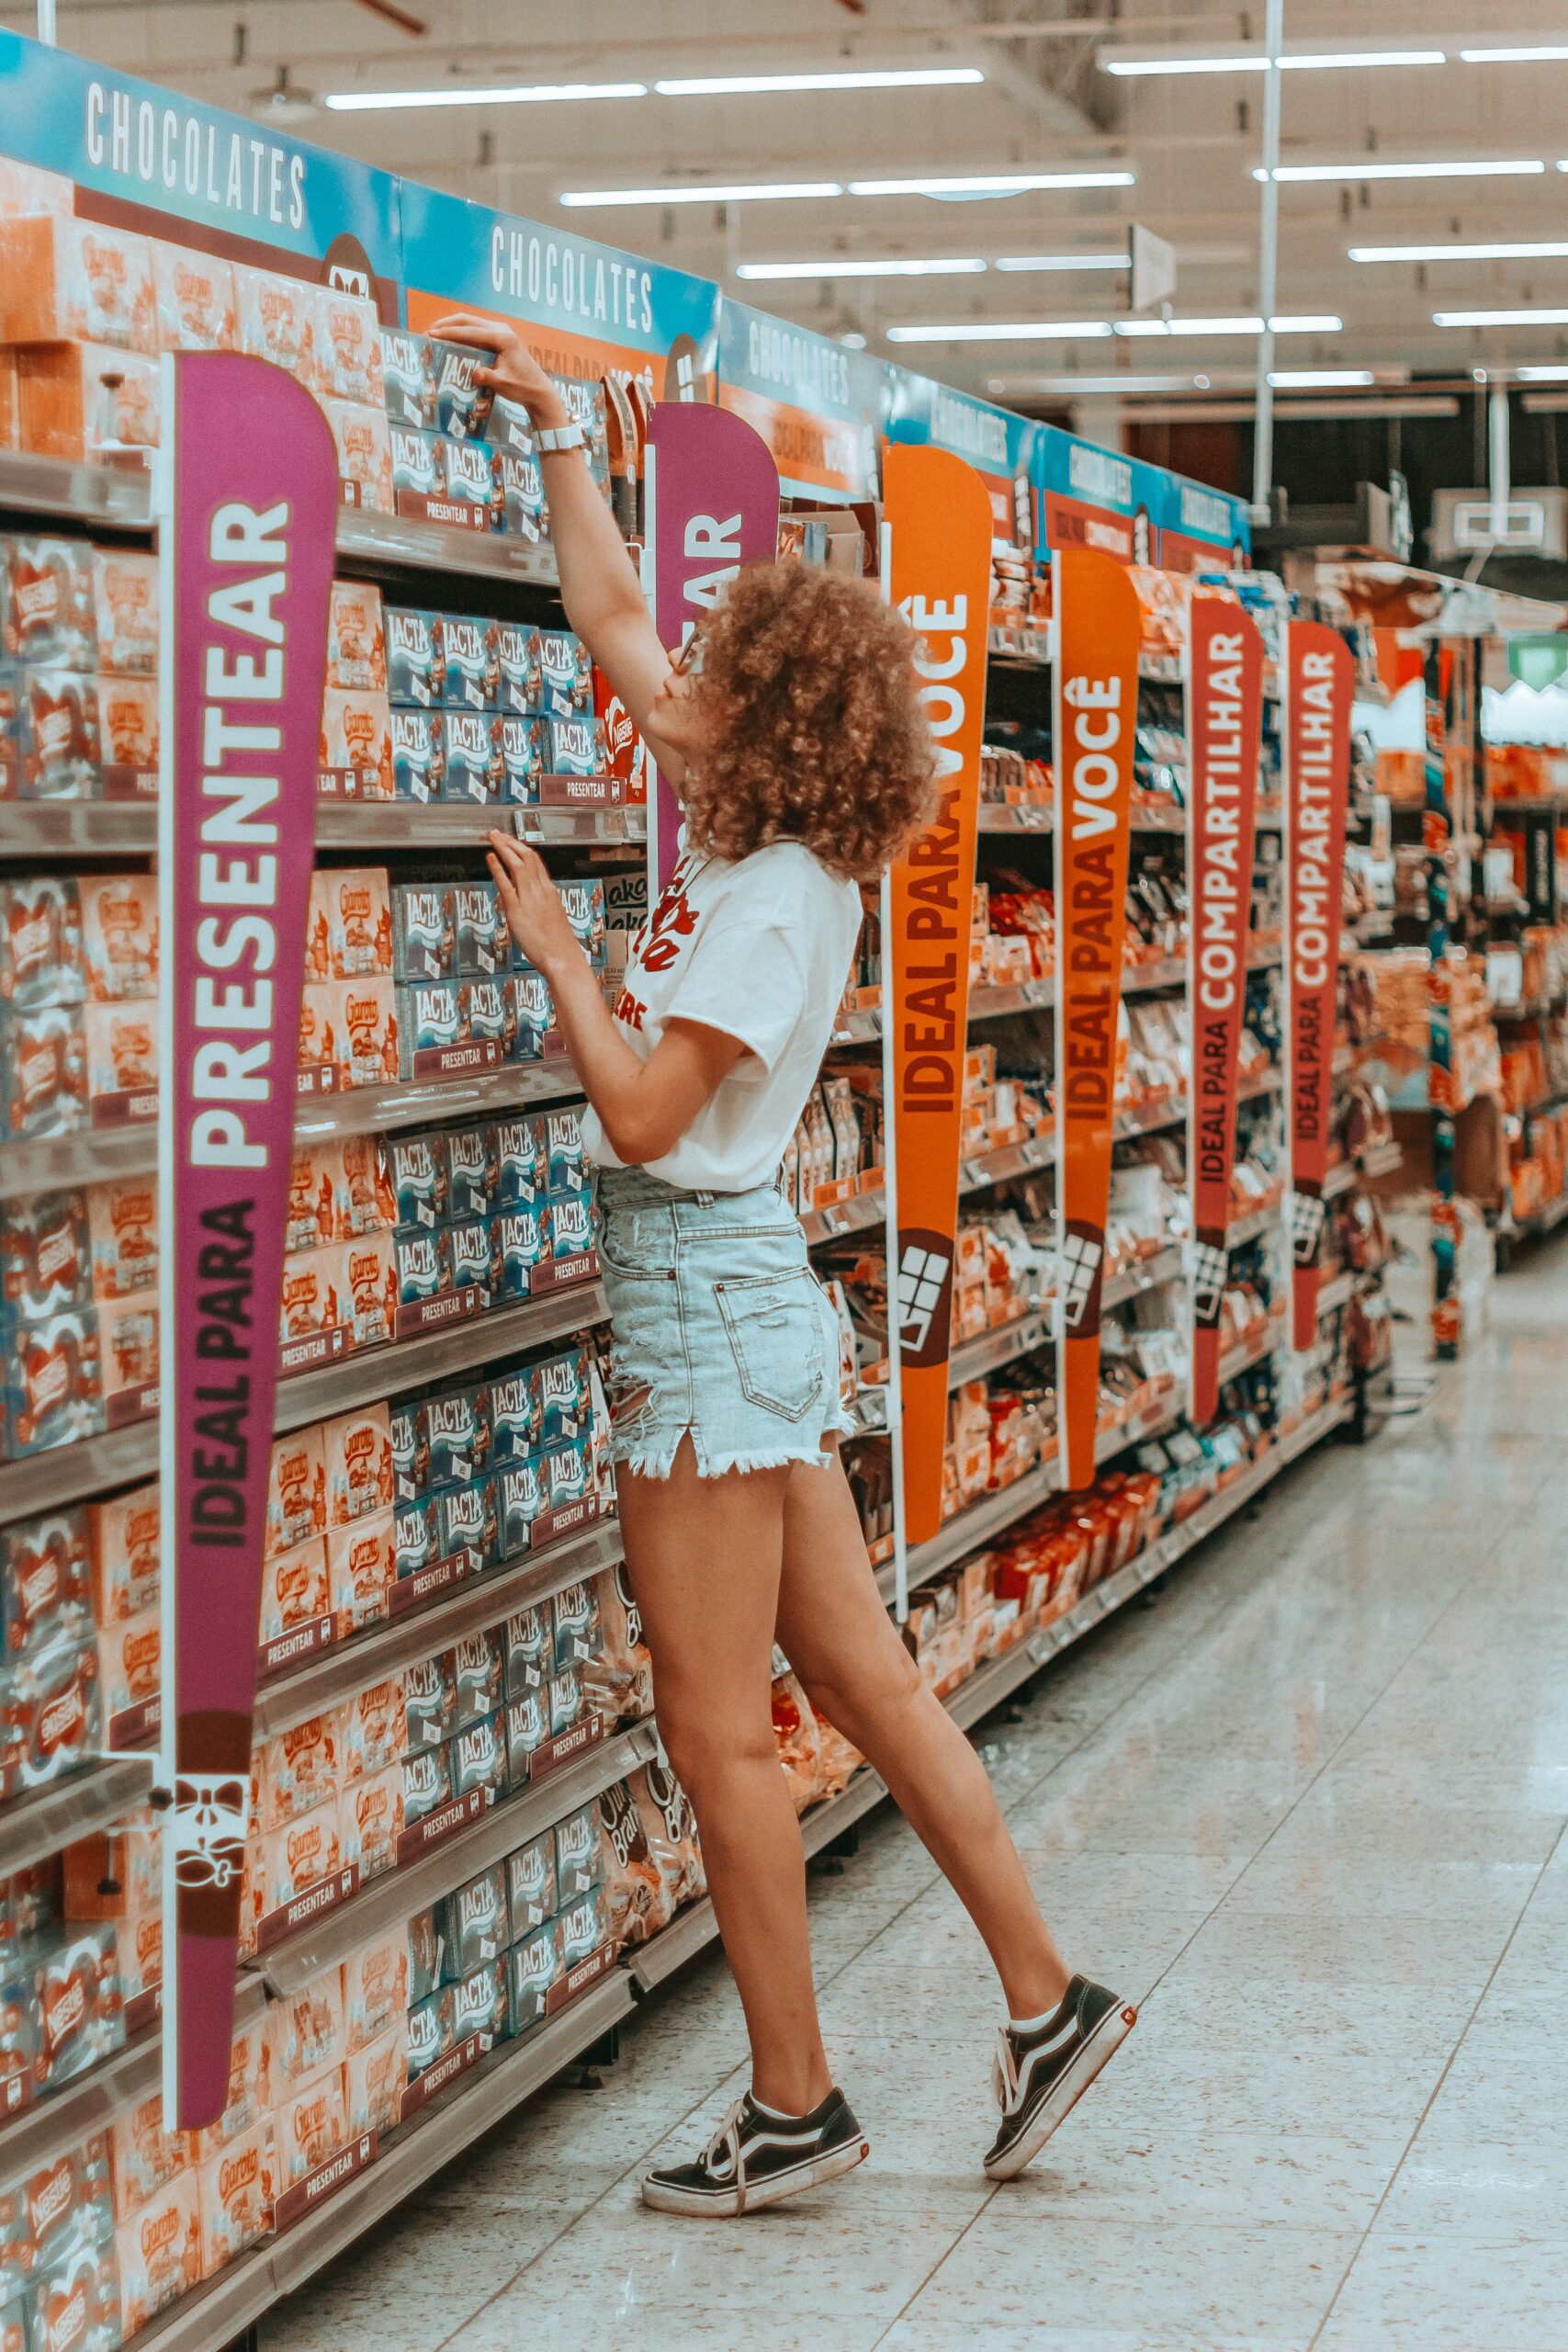 woman-grocery-shopping-by-allef-vinicius